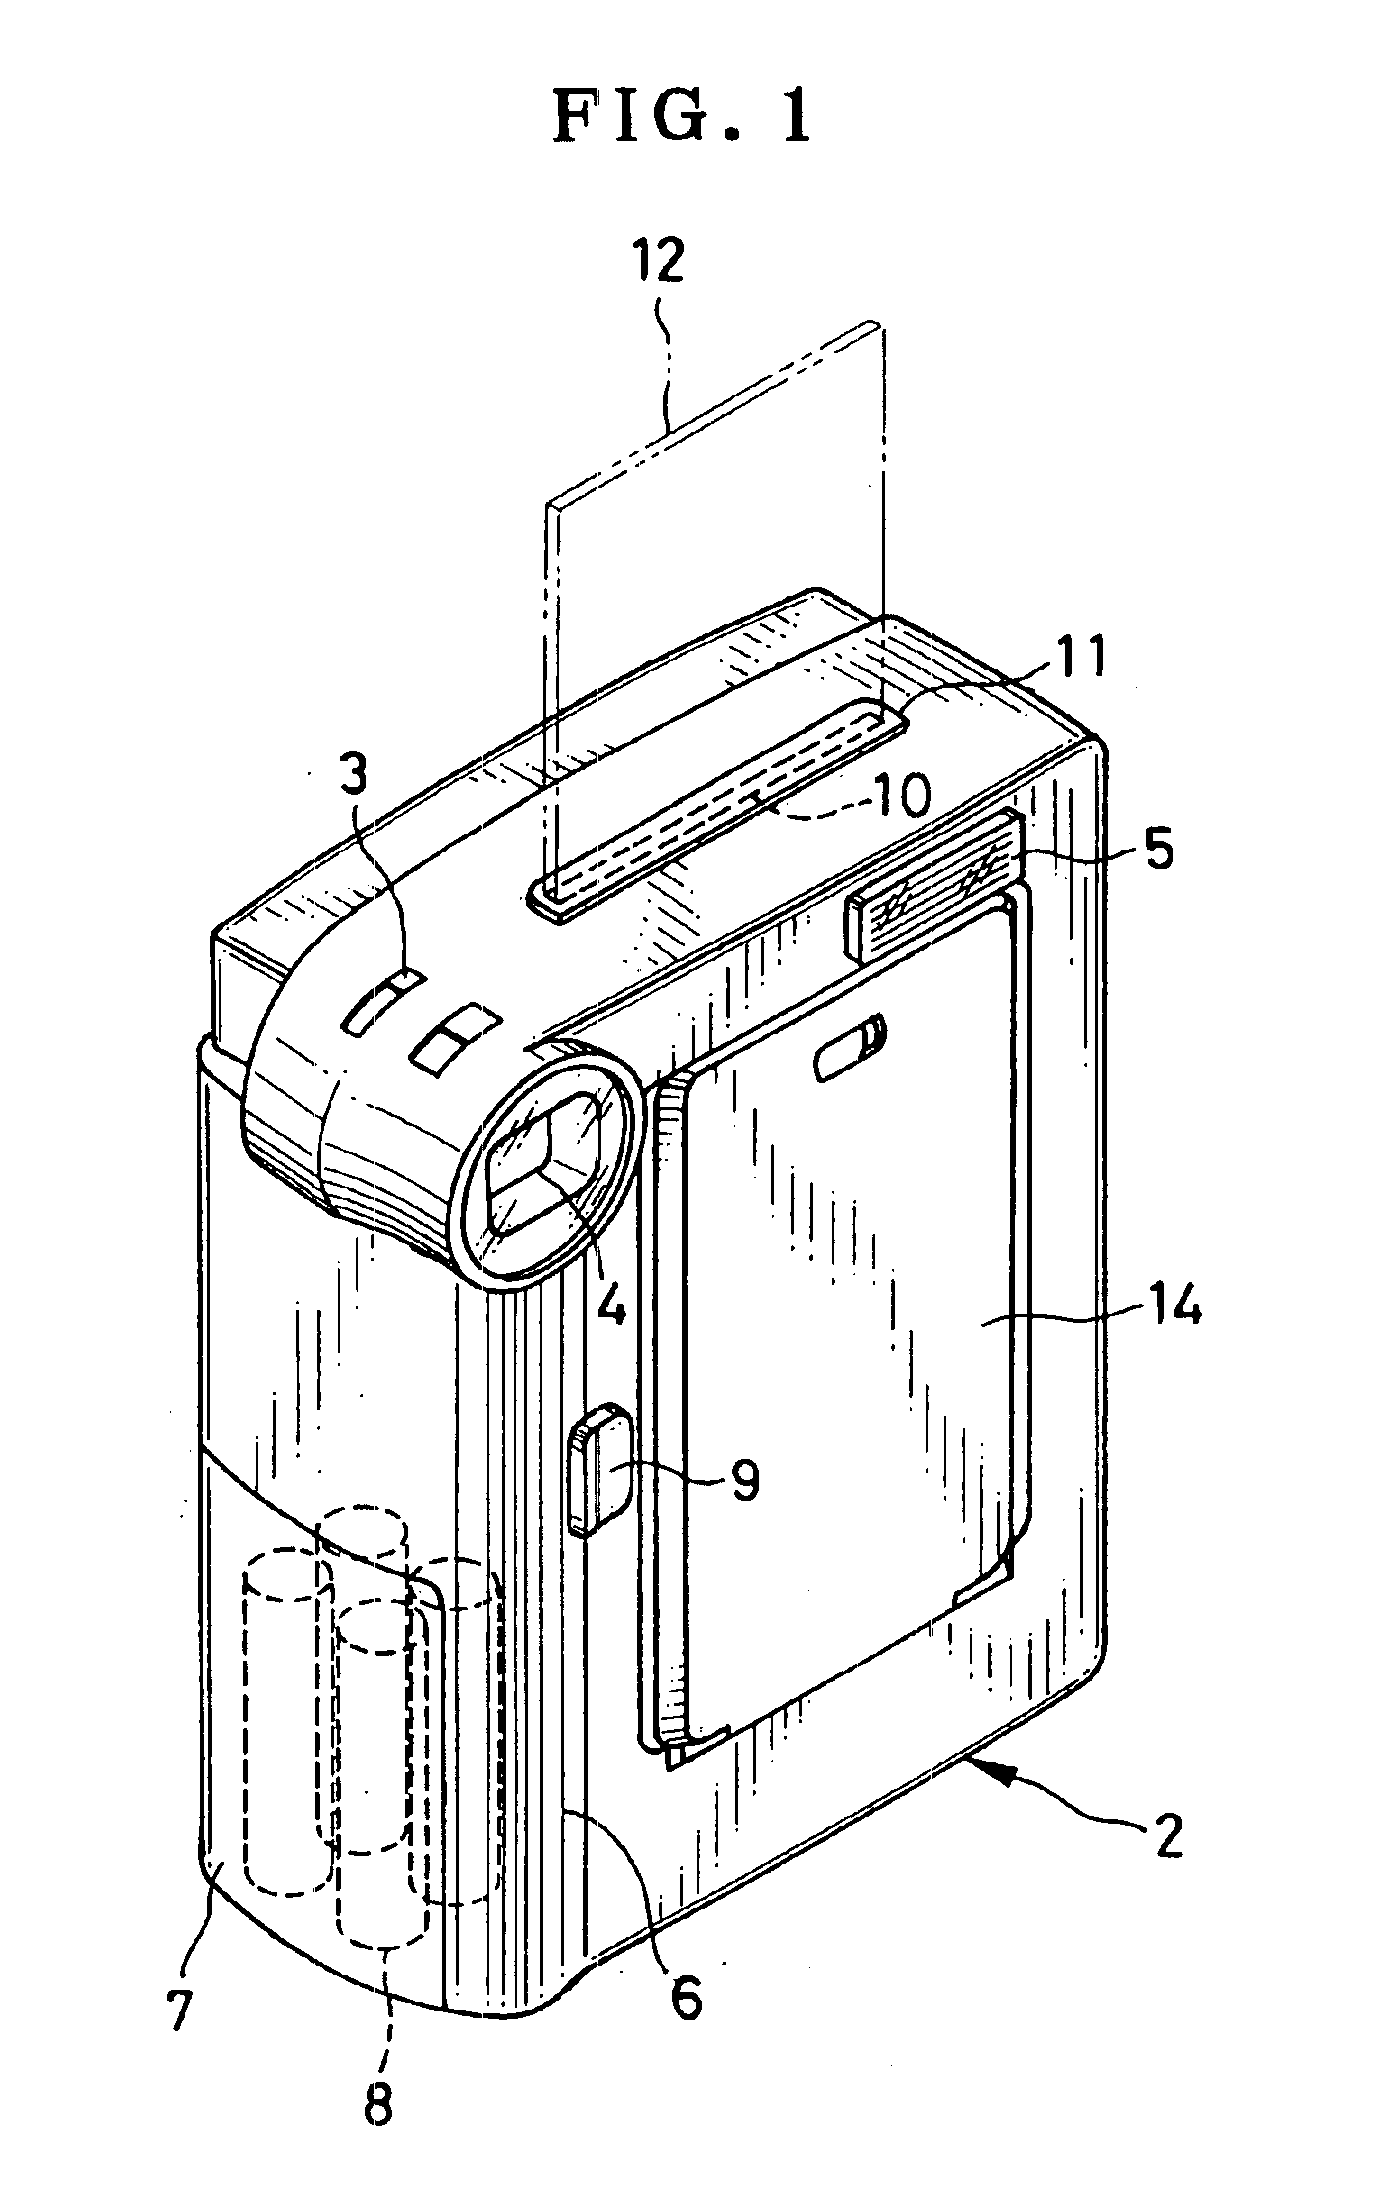 Electronic still camera with printer